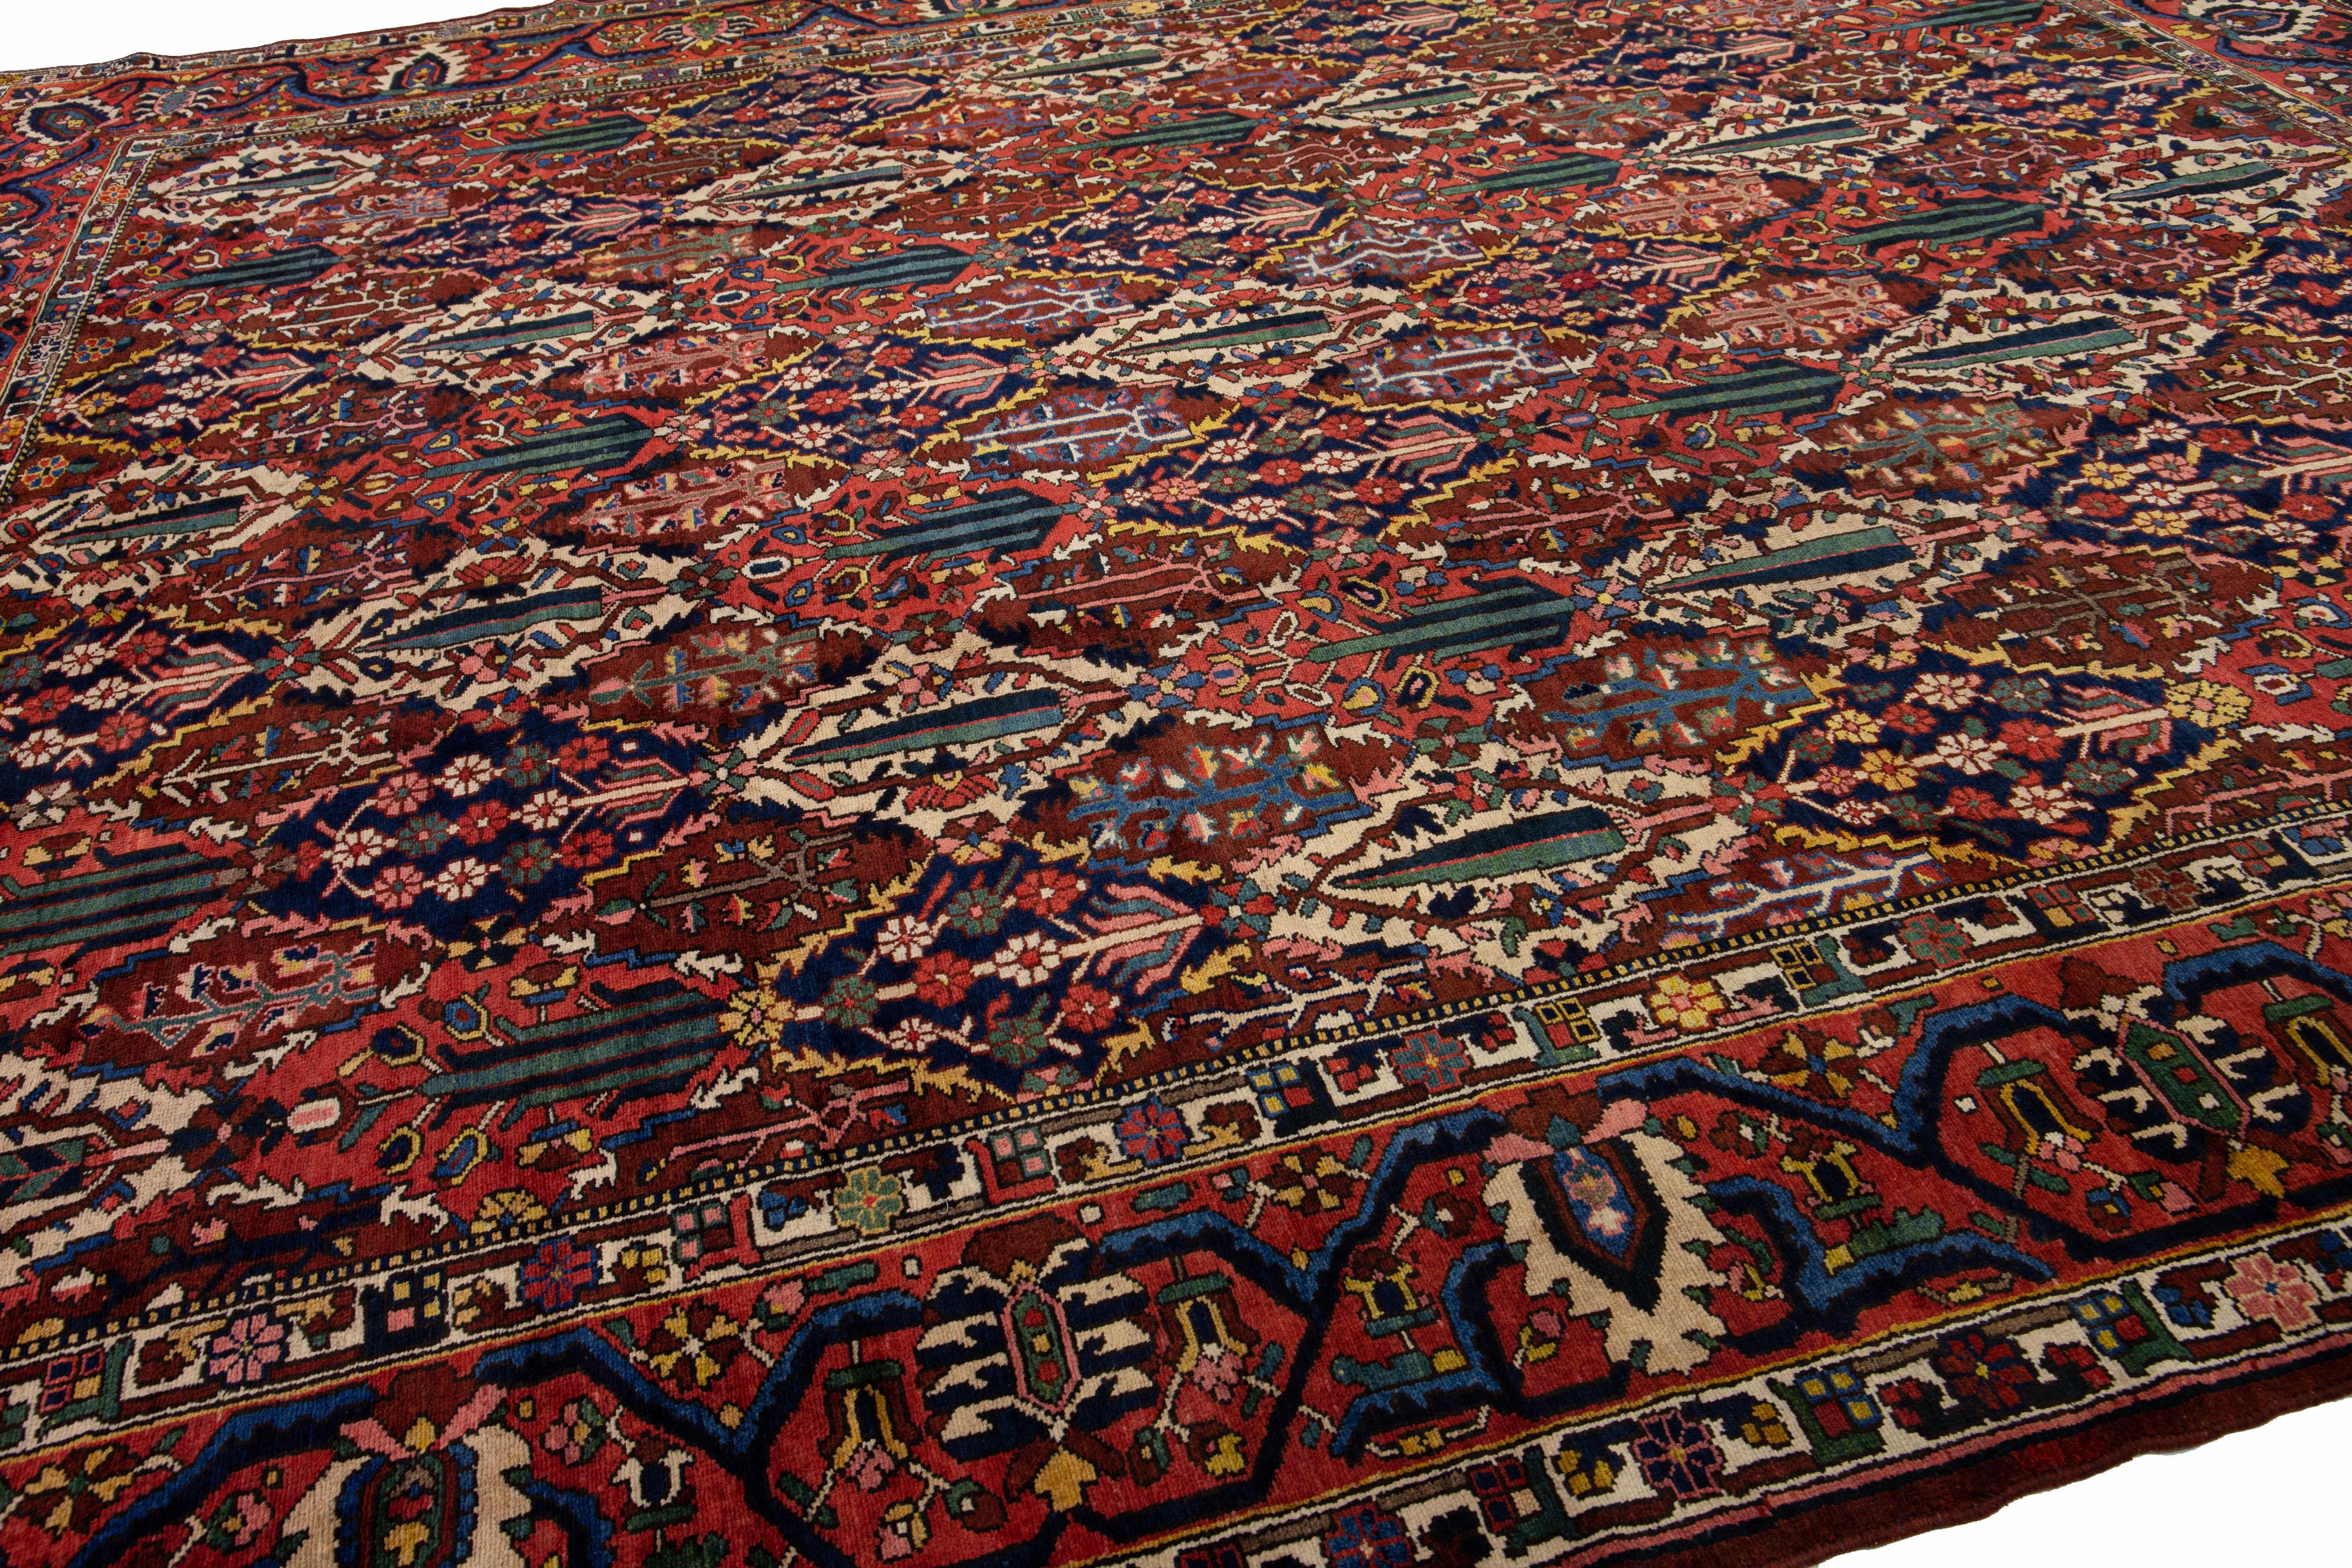 Beautiful Antique Bakhtiari hand-knotted wool rug with a red color field. This Persian piece has all-over multicolor accents in a classic pattern design.

This rug measures 12'4